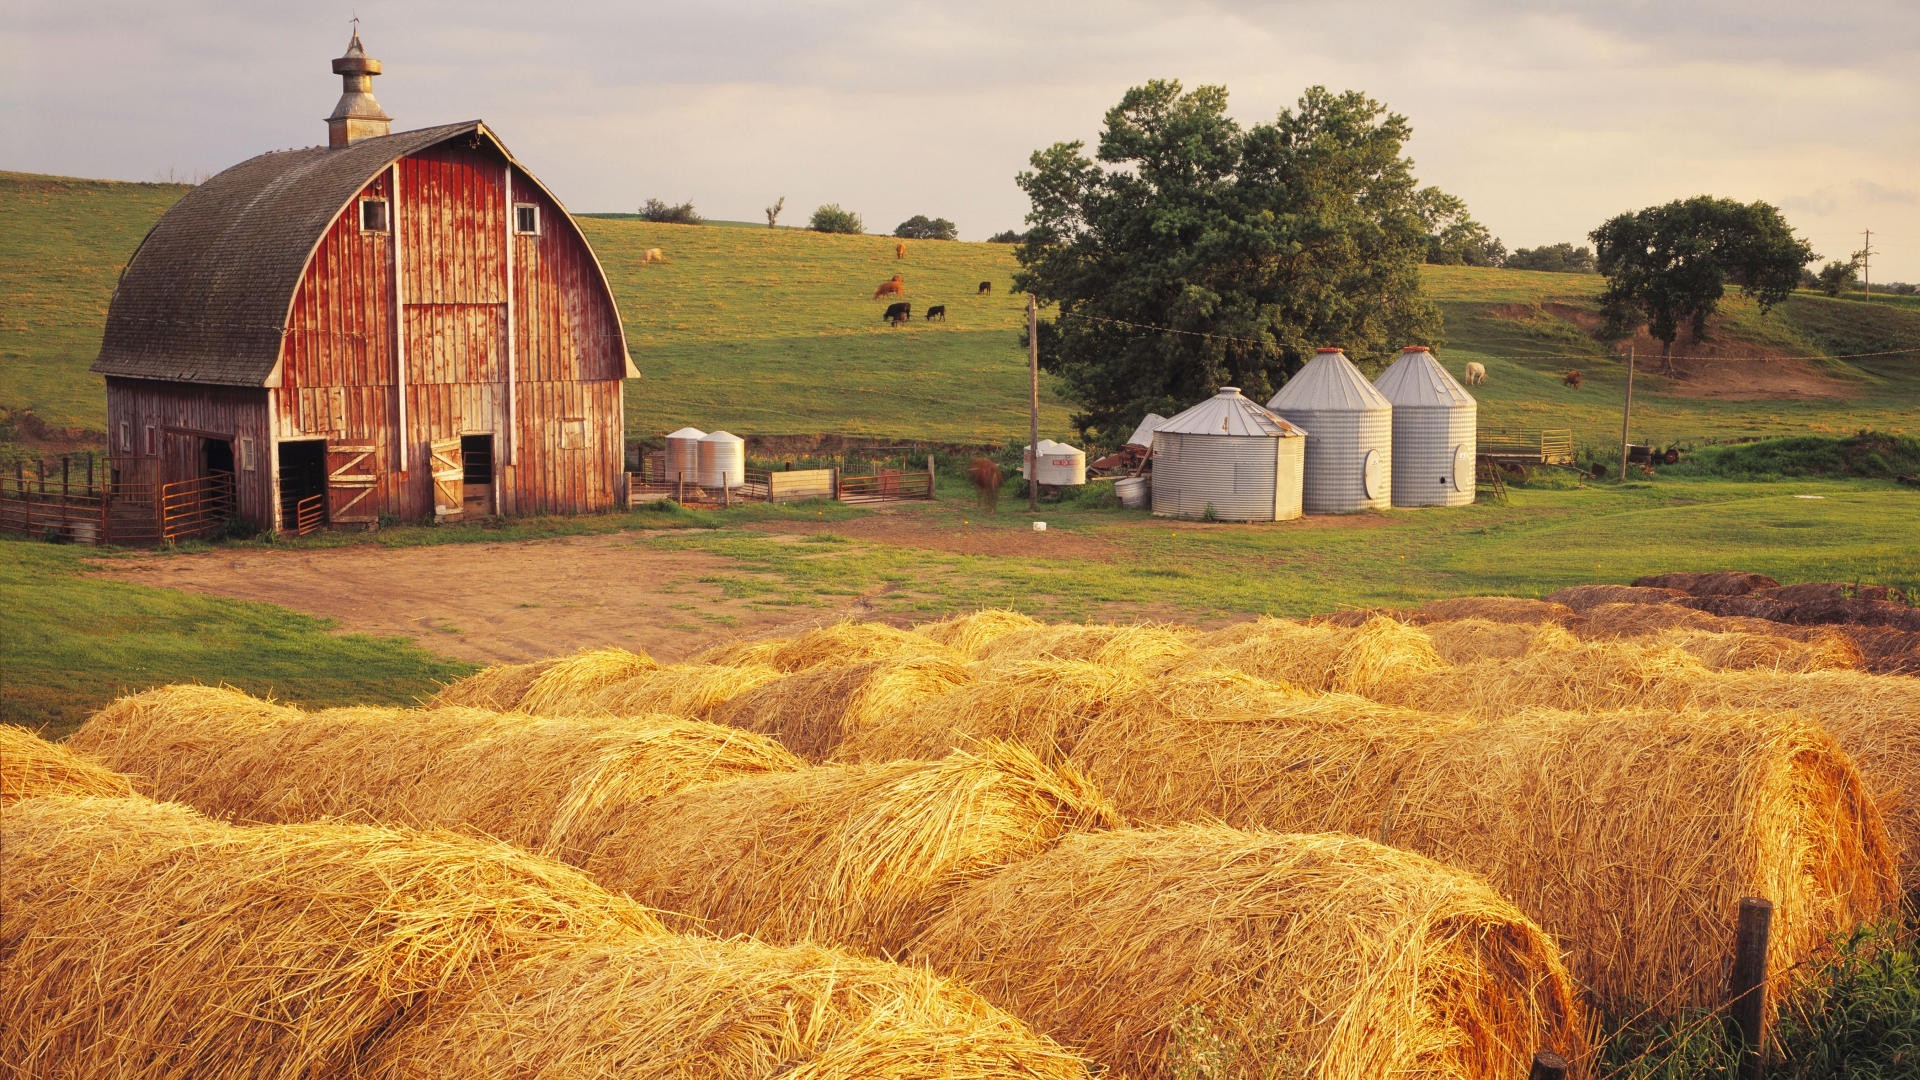 1920x1080 Life On the Farm Country | Farm Computer Wallpapers, Desktop Backgrounds |   | ID